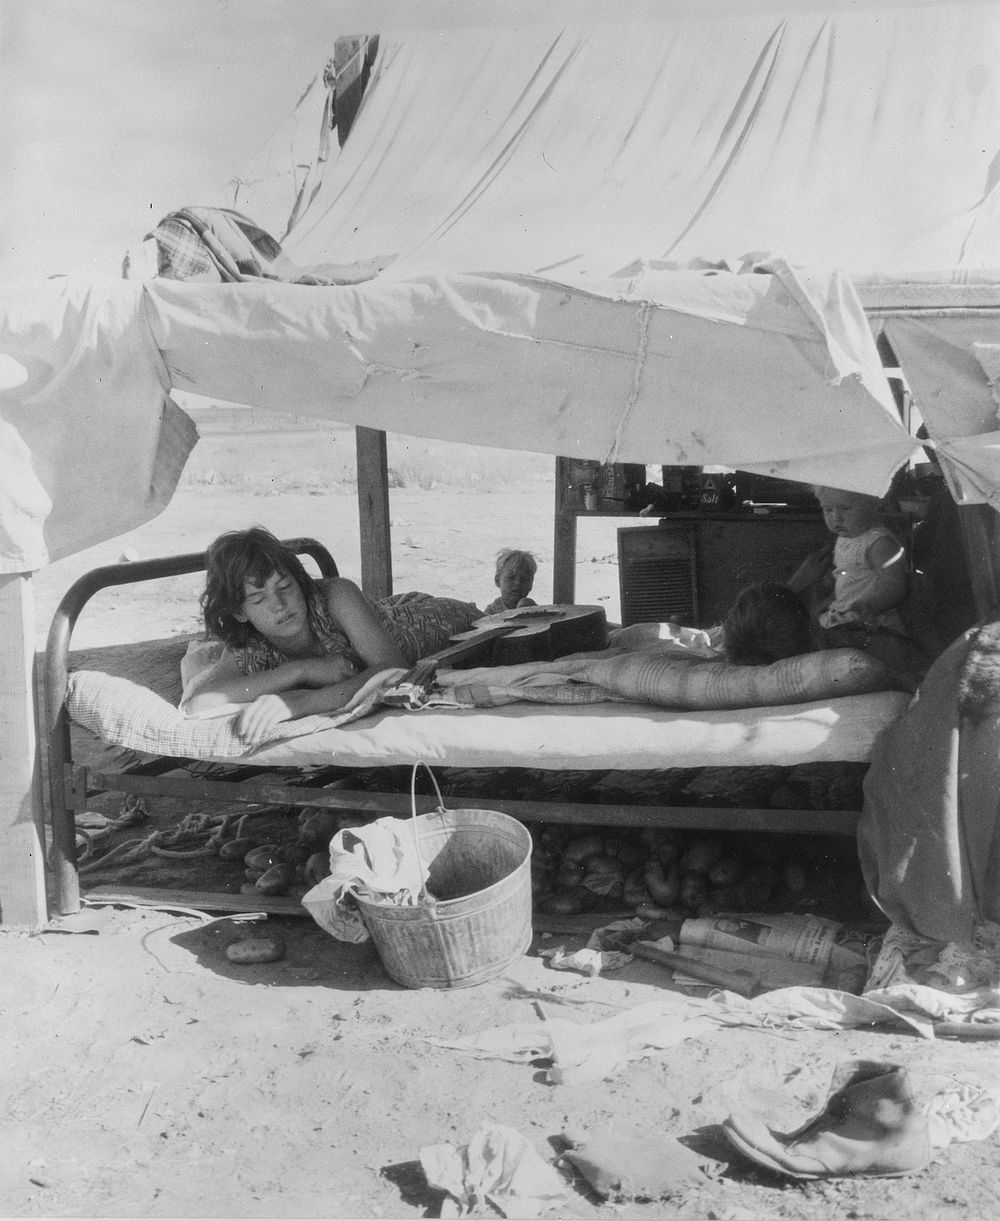 Oklahoma potato picker's family encamped on the flats near Shafter, California. Sourced from the Library of Congress.